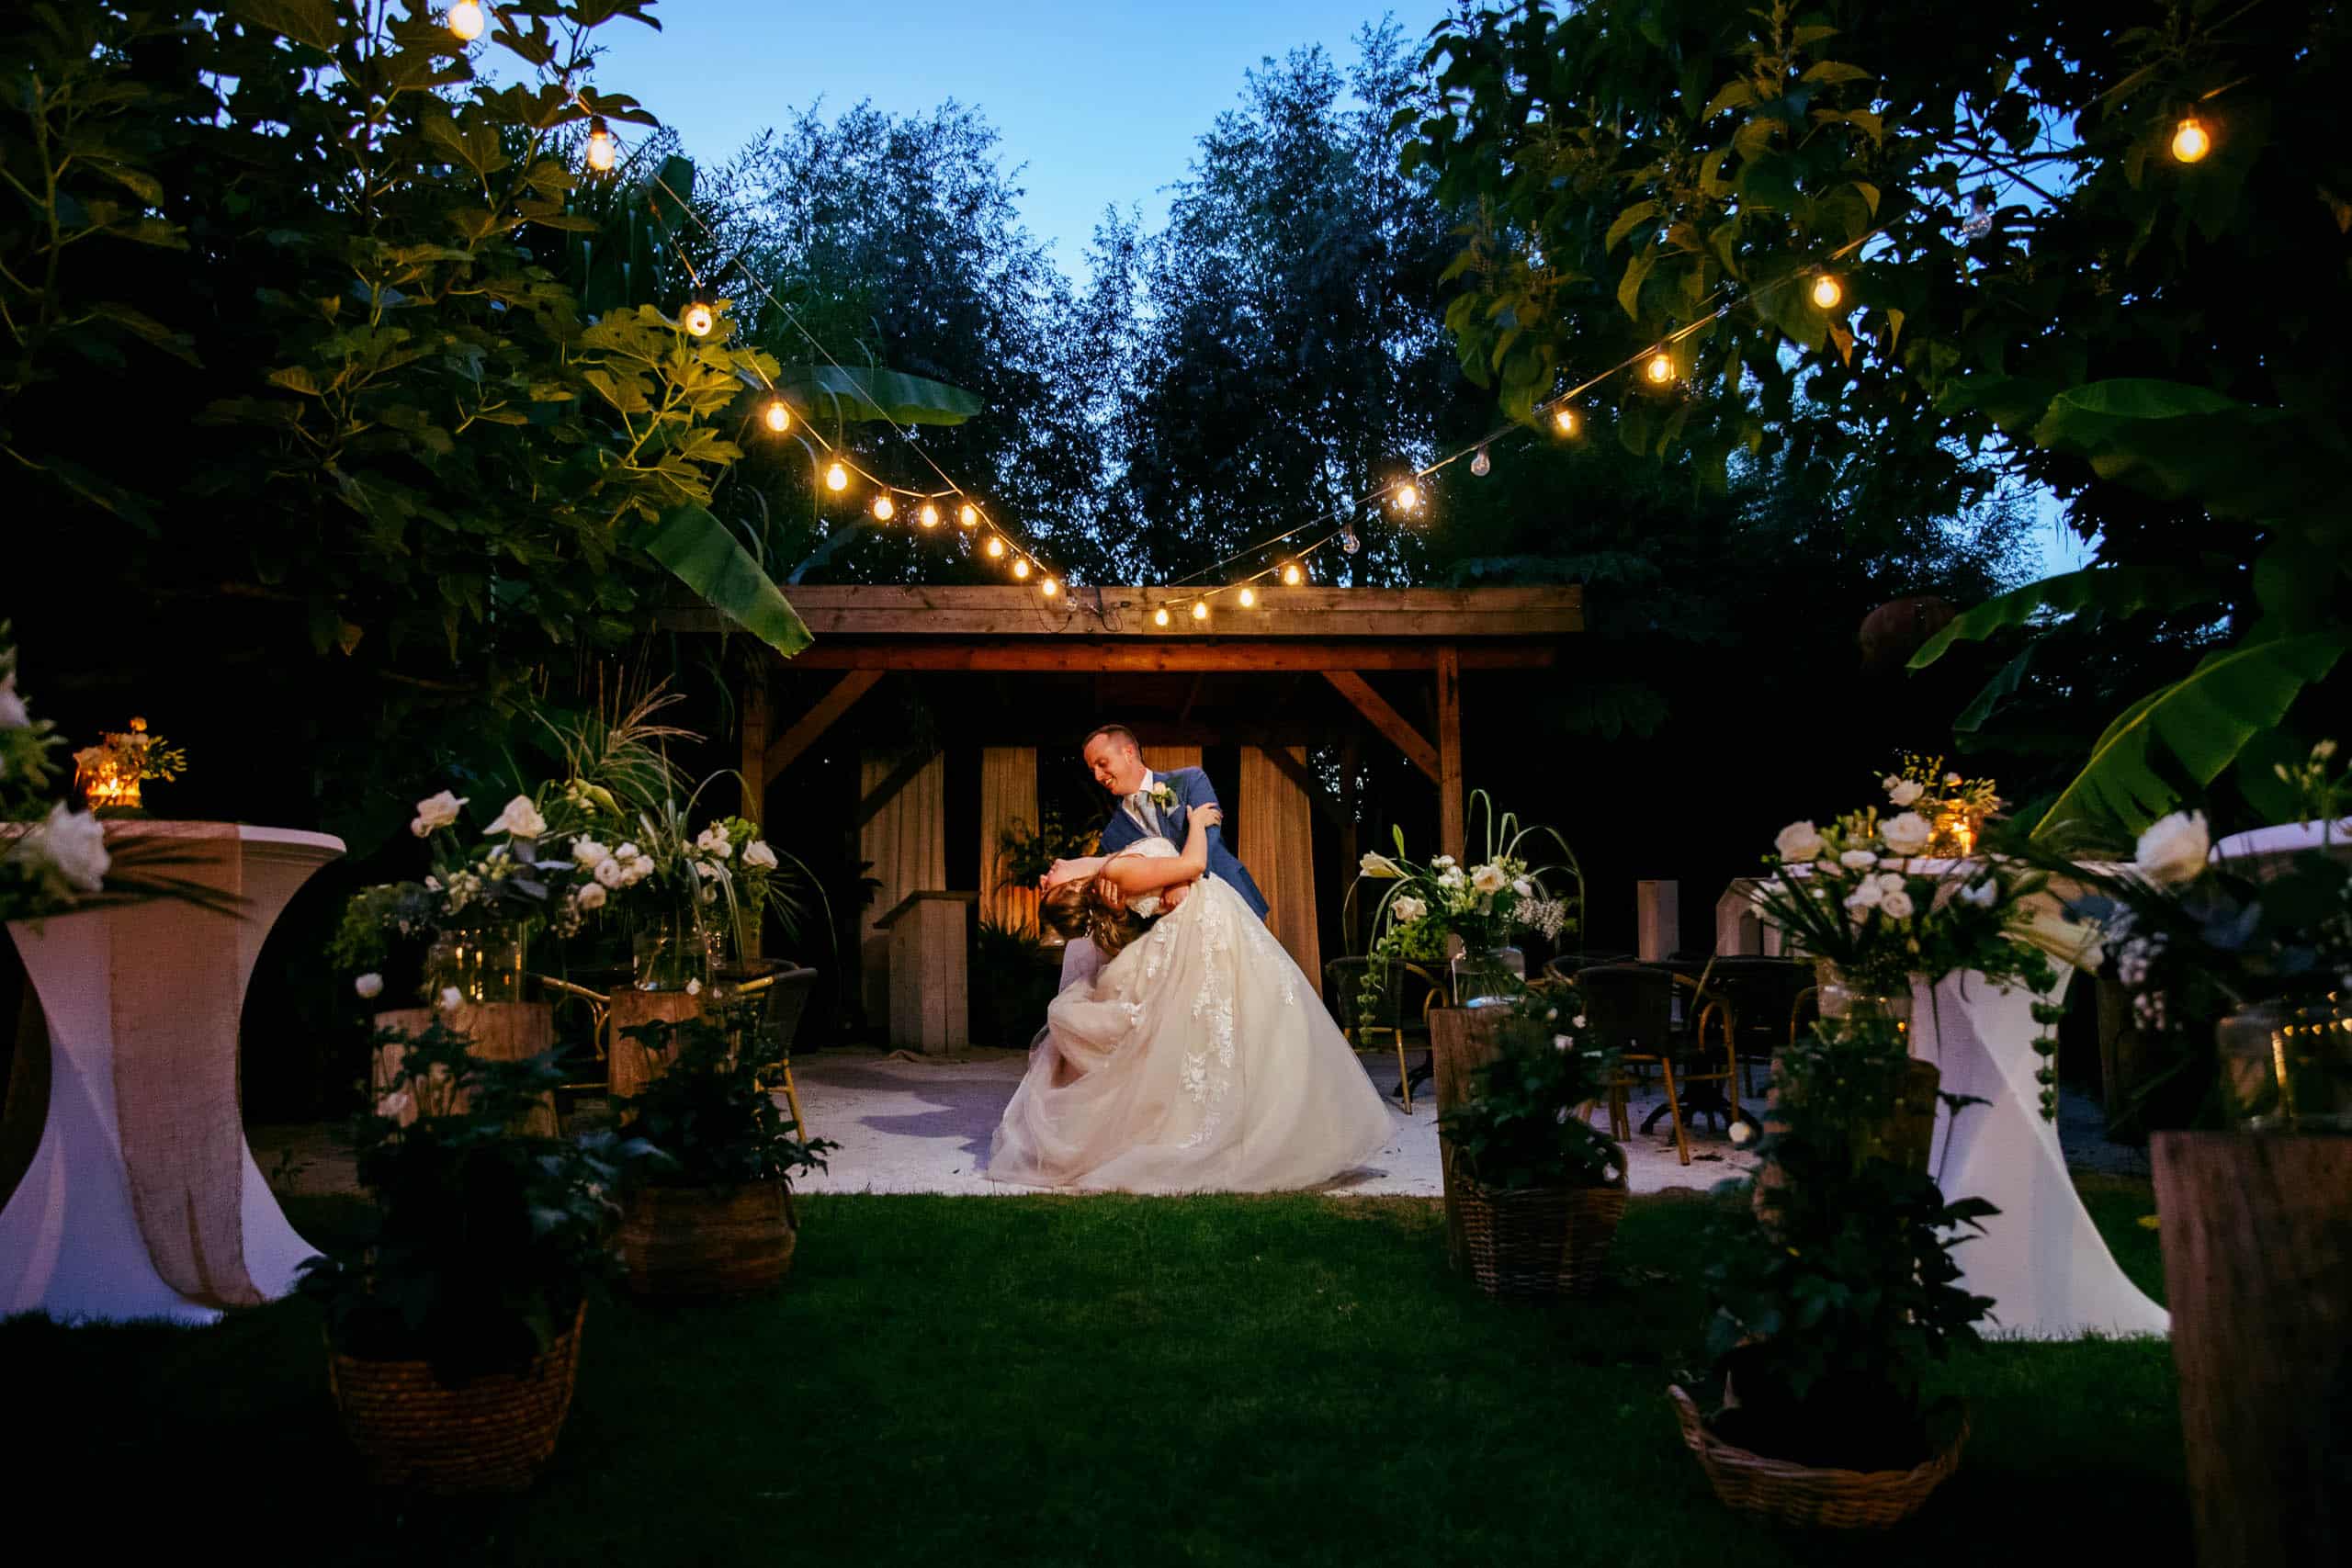 Asking a bride and groom under lights at a wedding venue.